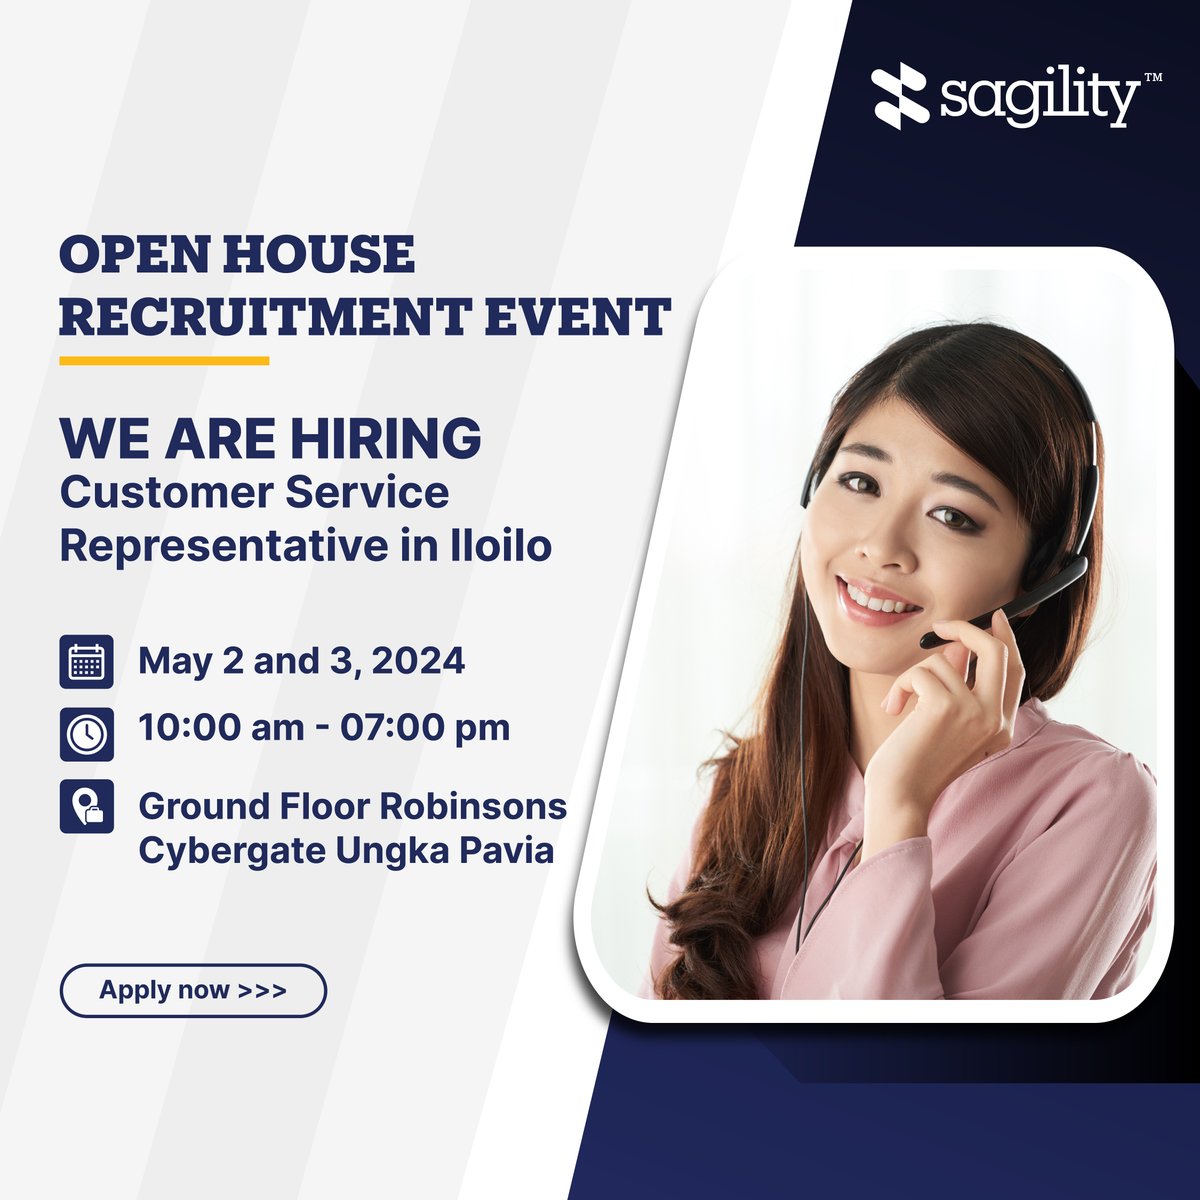 Just bring your updated resume and a valid ID. See you!  Qualifications:

2nd year college (72 units) with at least 6 months of work experience.
College graduate with or without work experience.

#Sagility #HiringNow #CustomerServiceRepresentatives #HealthcareCareers #JoinOurTeam